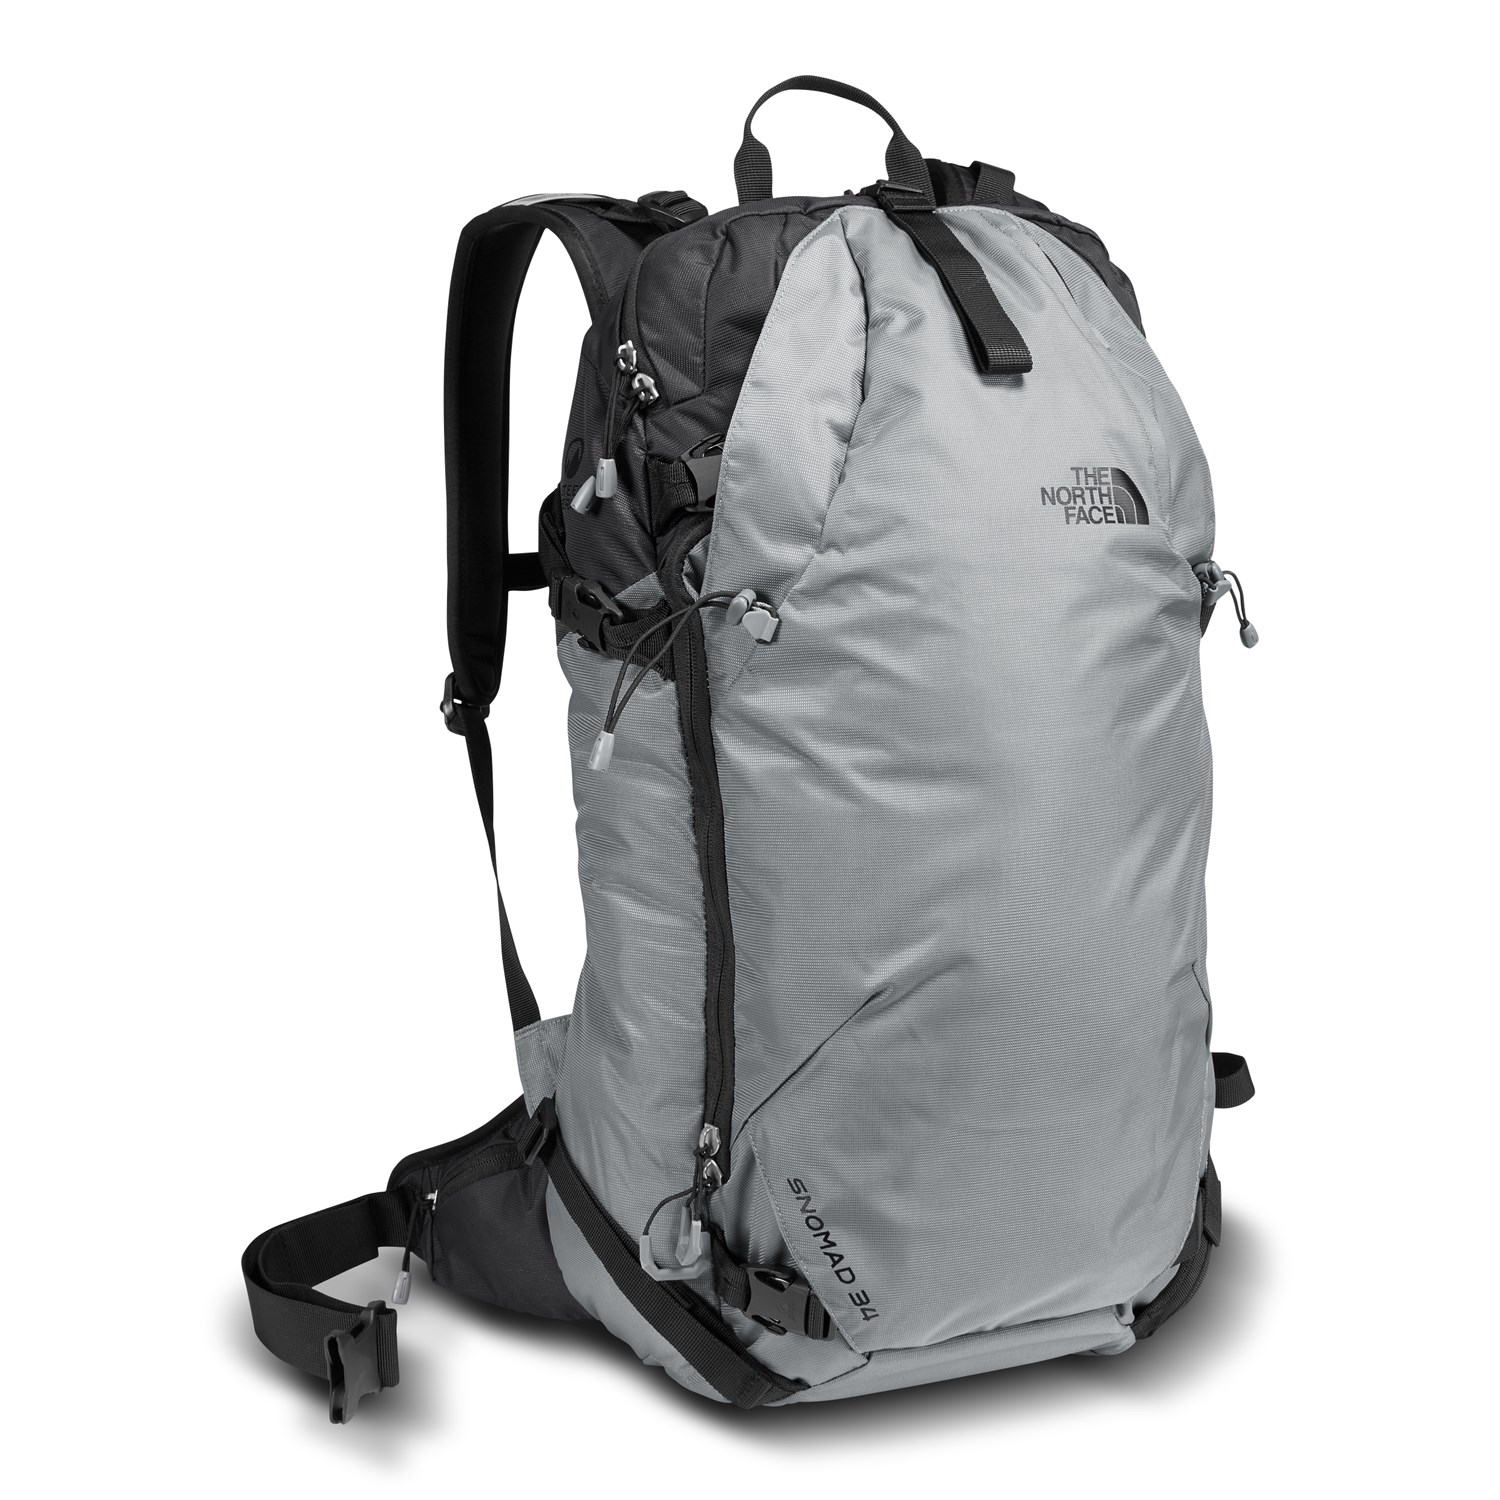 The North Face Snomad 34 Backpack | evo